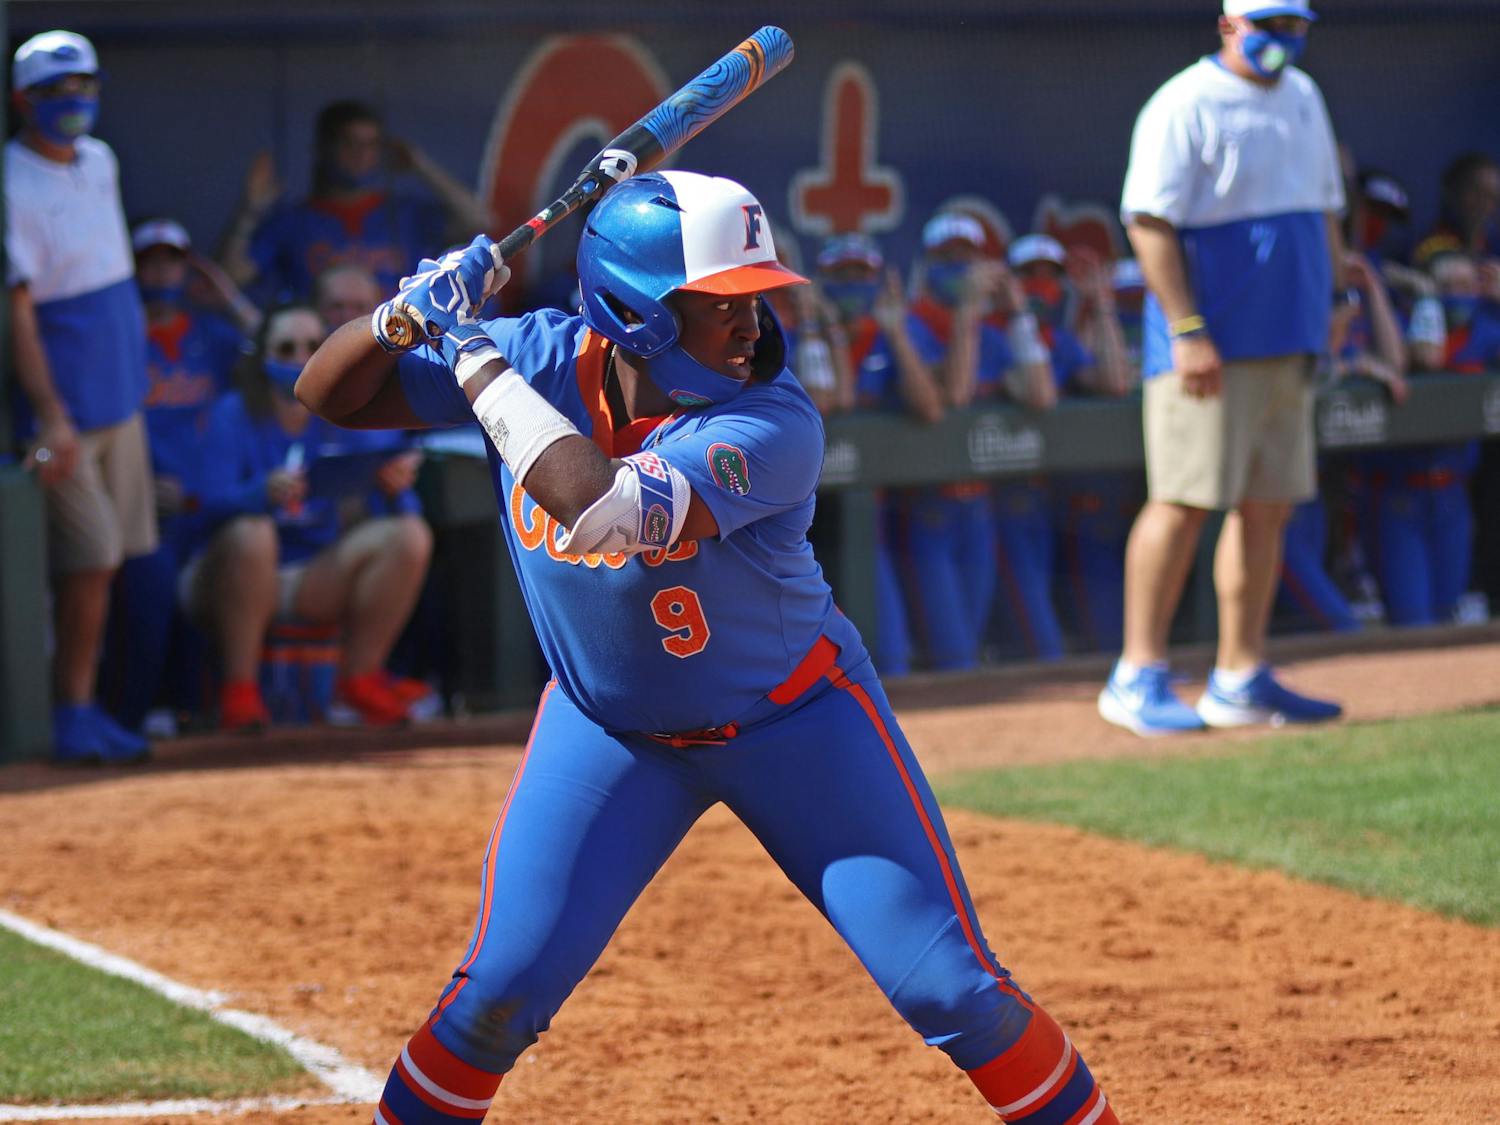 Florida's Jaimie Hoover stands in the batter's box against Louisville February 27. Hoover drove home the winning run over Missouri Friday to advance the Gators to the SEC Tournament final.